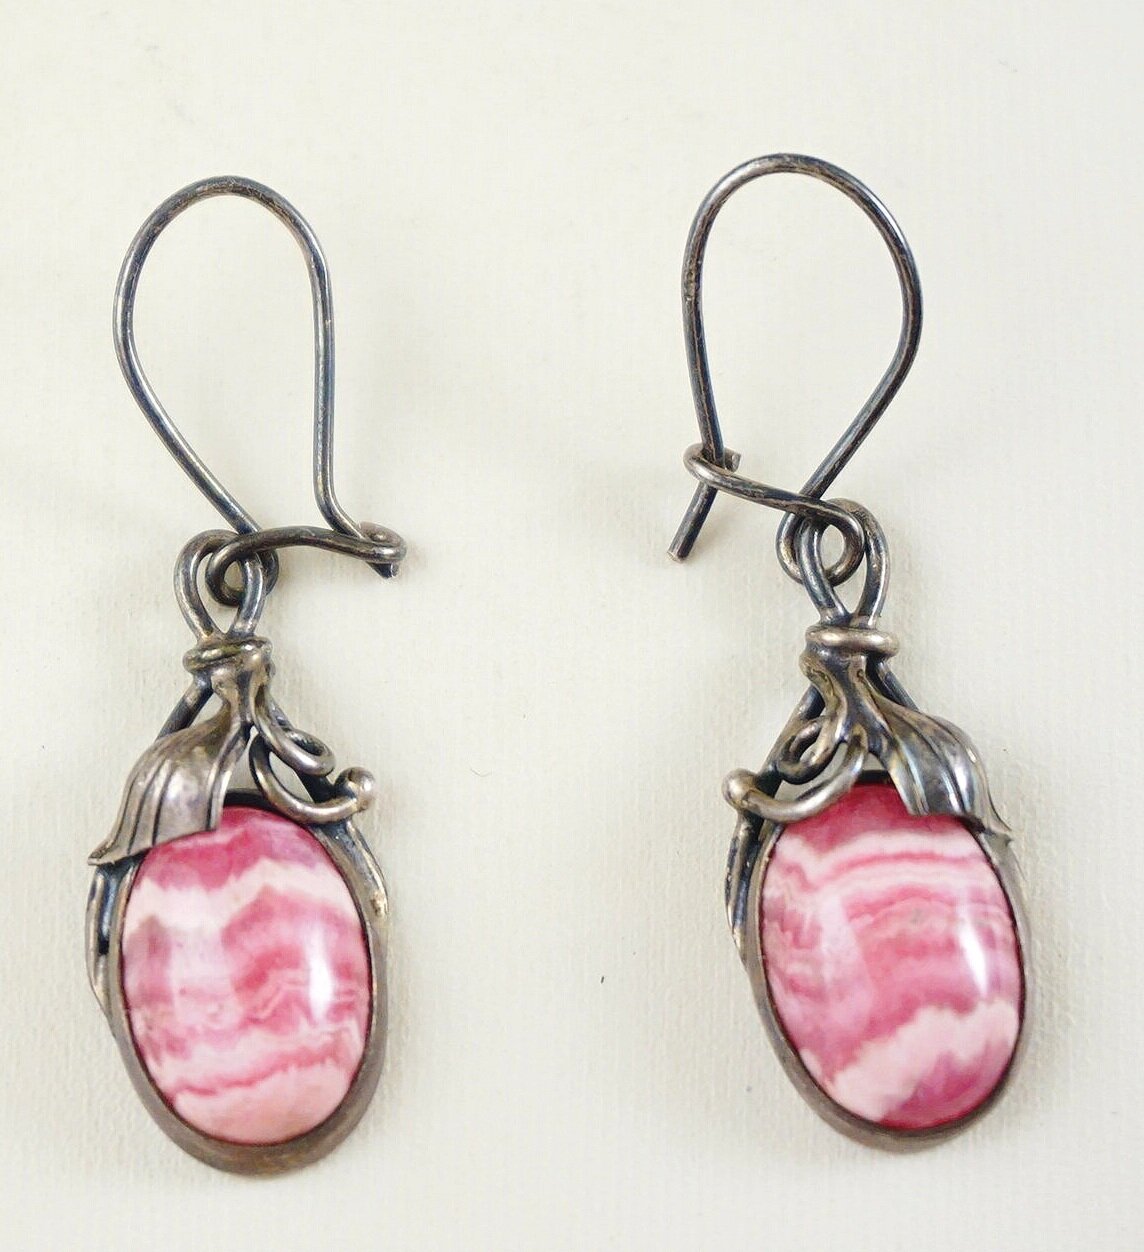 Stone Earrings Native American Gifts for Her Handmade Jewelry Ready to Ship